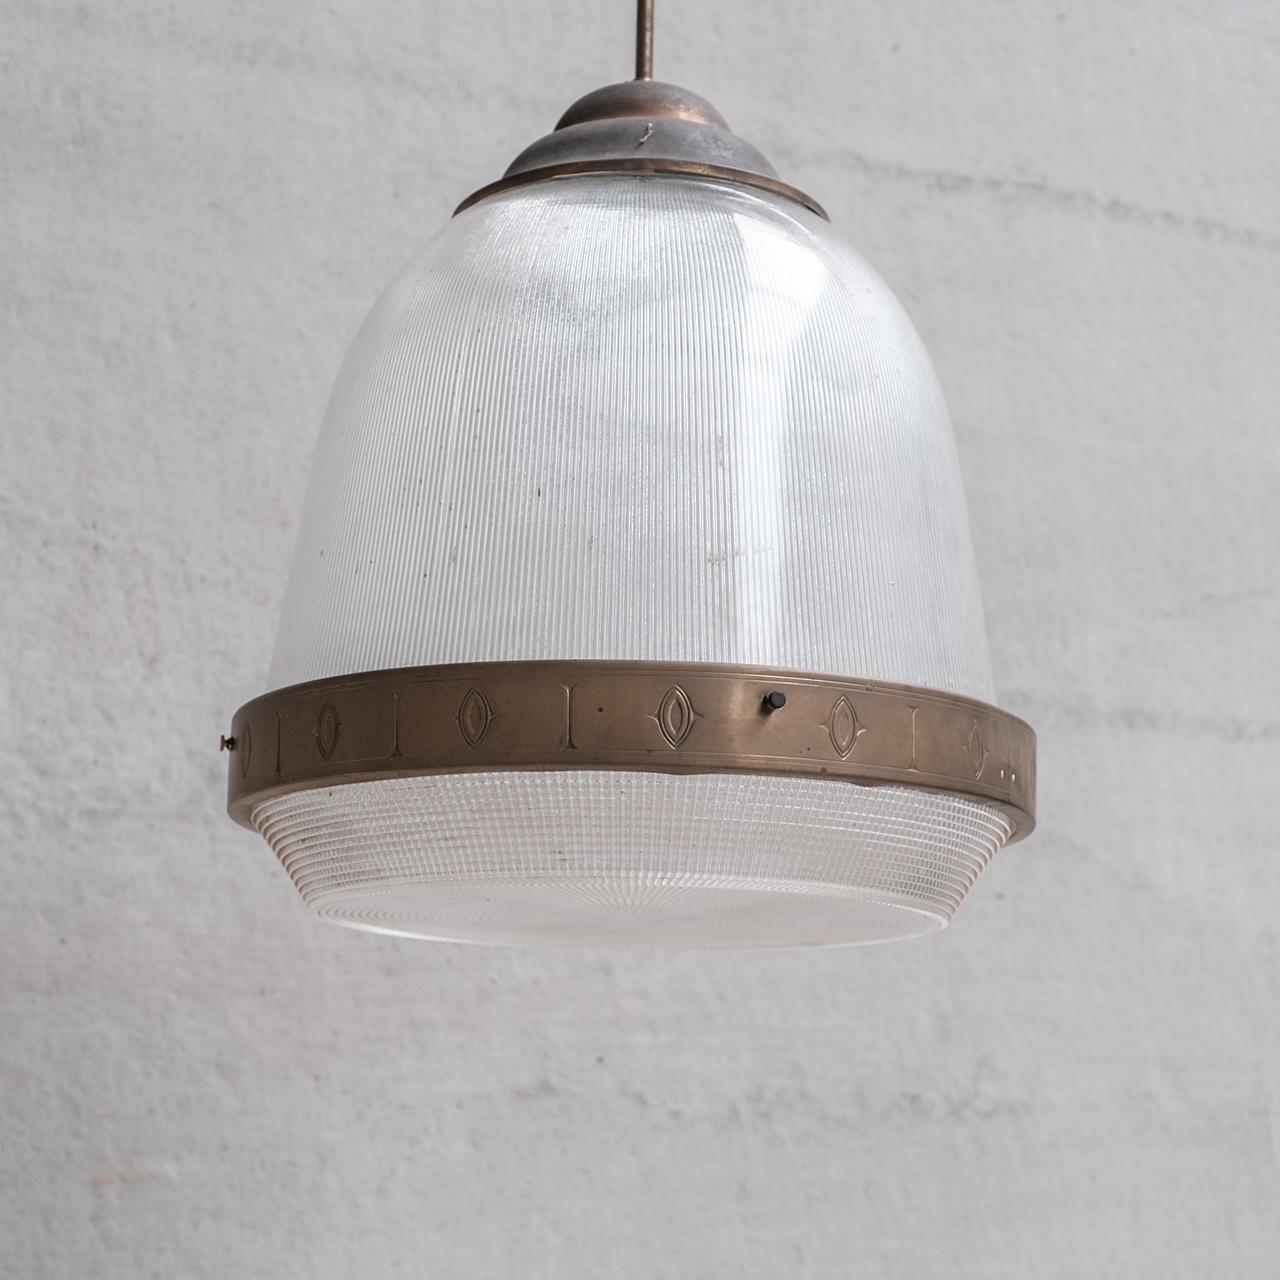 Mid-20th Century Large Two Part Holophane Style Mid-Century Pendant Light For Sale